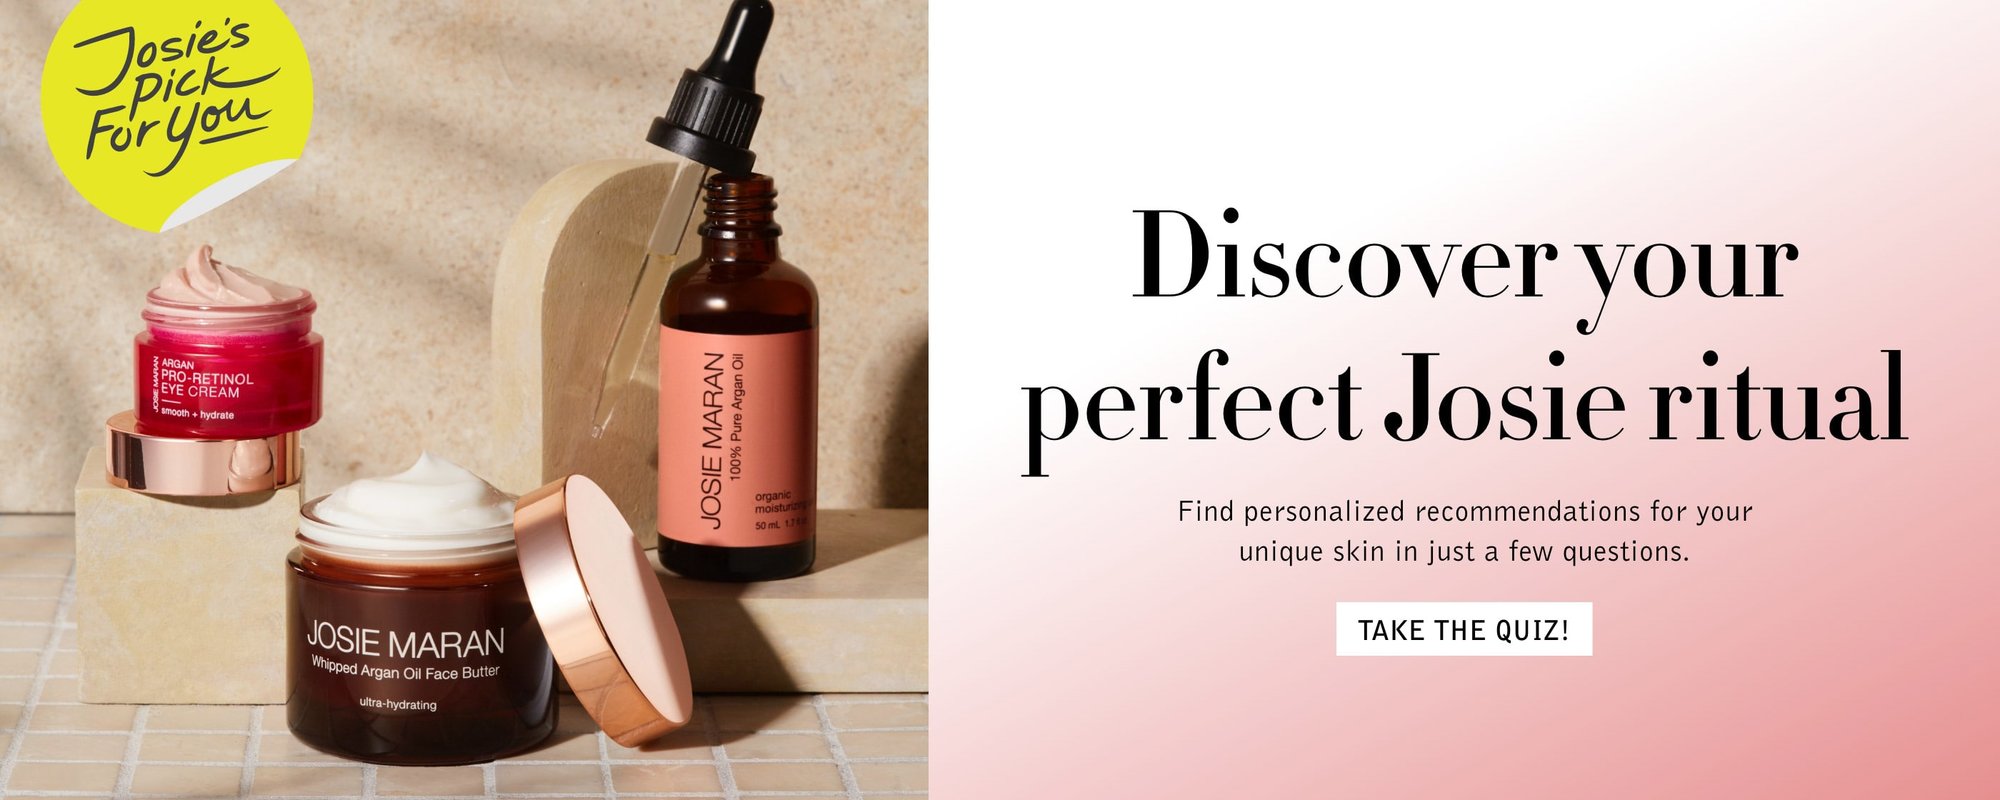 Discover Your Perfect Josie Ritual. Find personalized recommendations for your unique skin in just a few questions. Take The Quiz.